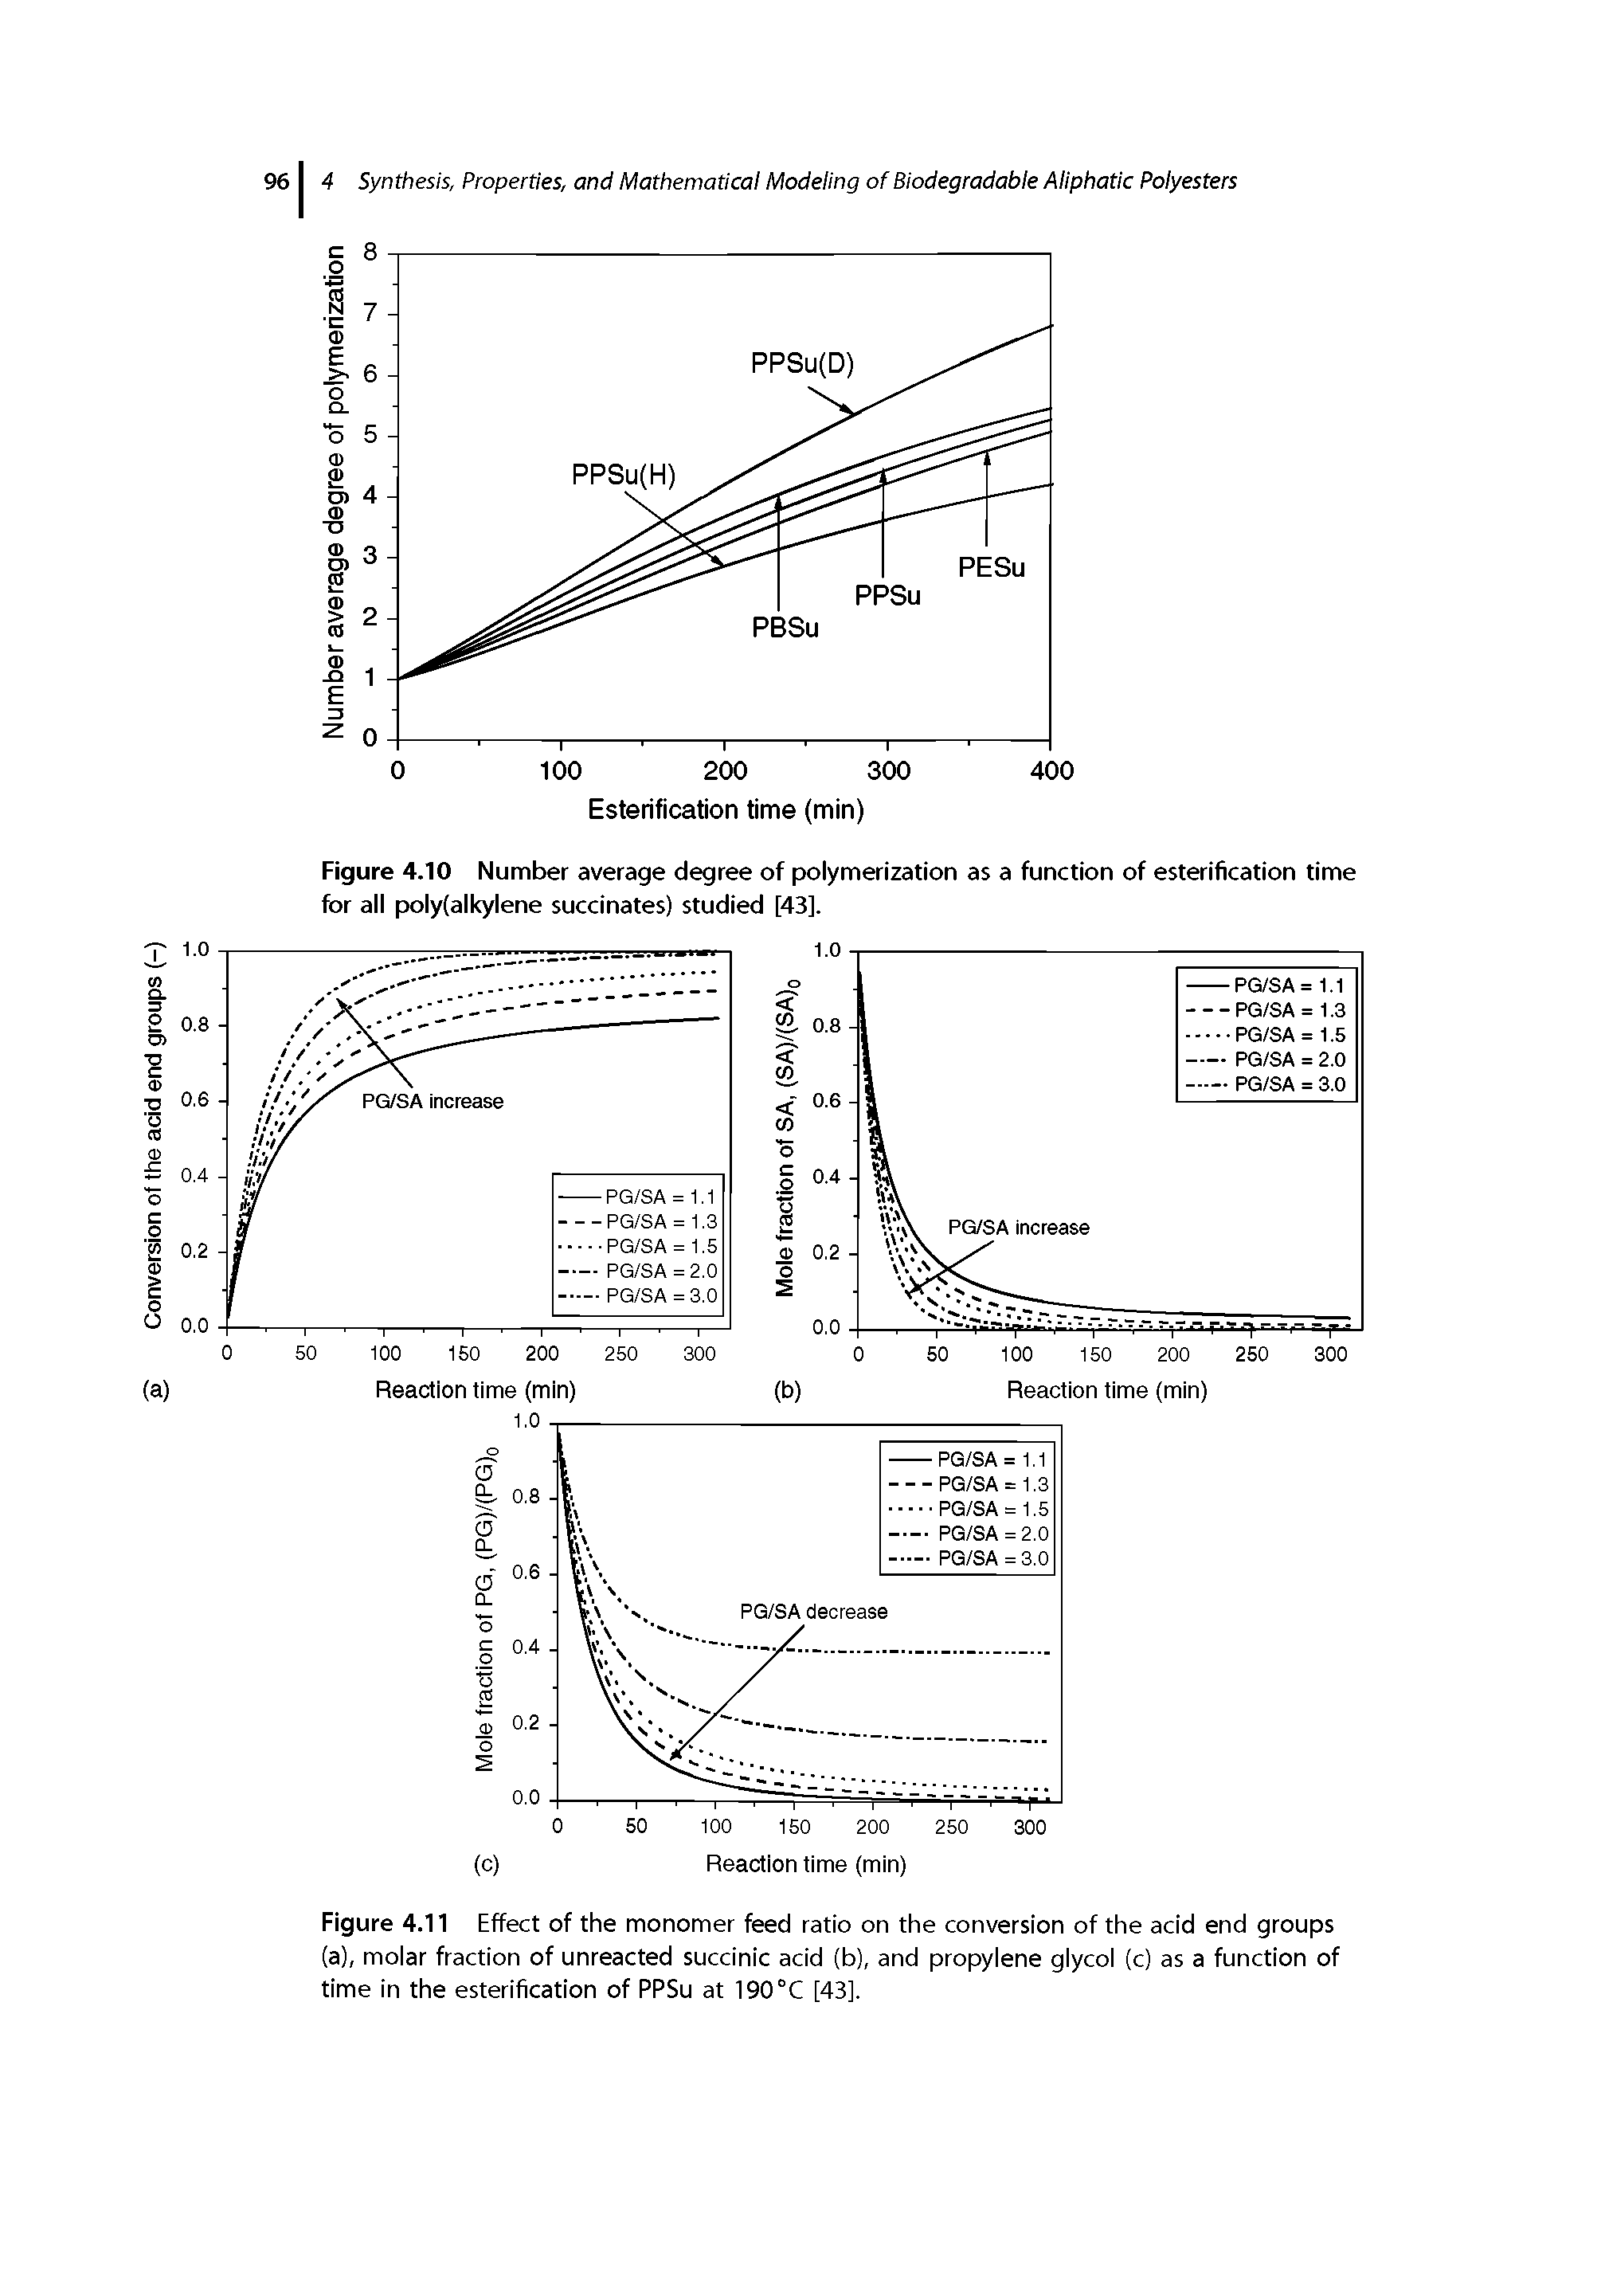 Figure 4.11 Effect of the monomer feed ratio on the conversion of the acid end groups (a), molar fraction of unreacted succinic acid (b), and propylene glycol (c) as a function of time in the esterification of PPSu at 190°C [43].